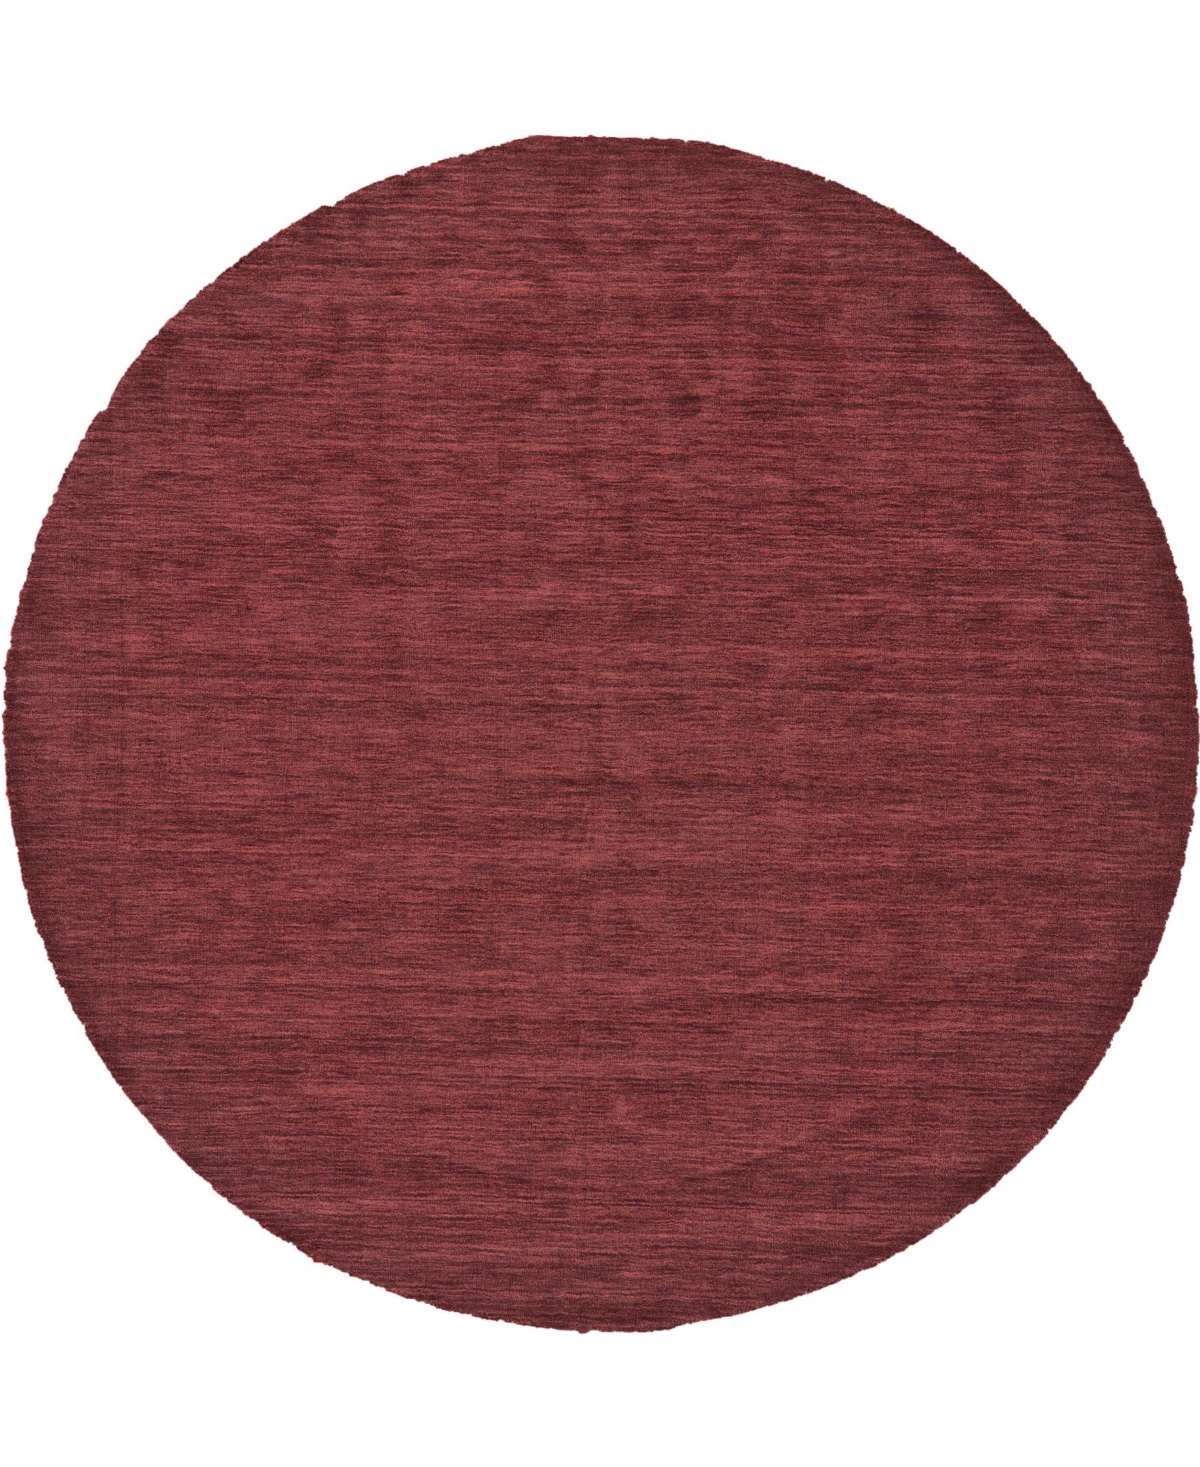 Feizy Nia R8049 10' x 10' Round Rug - Red